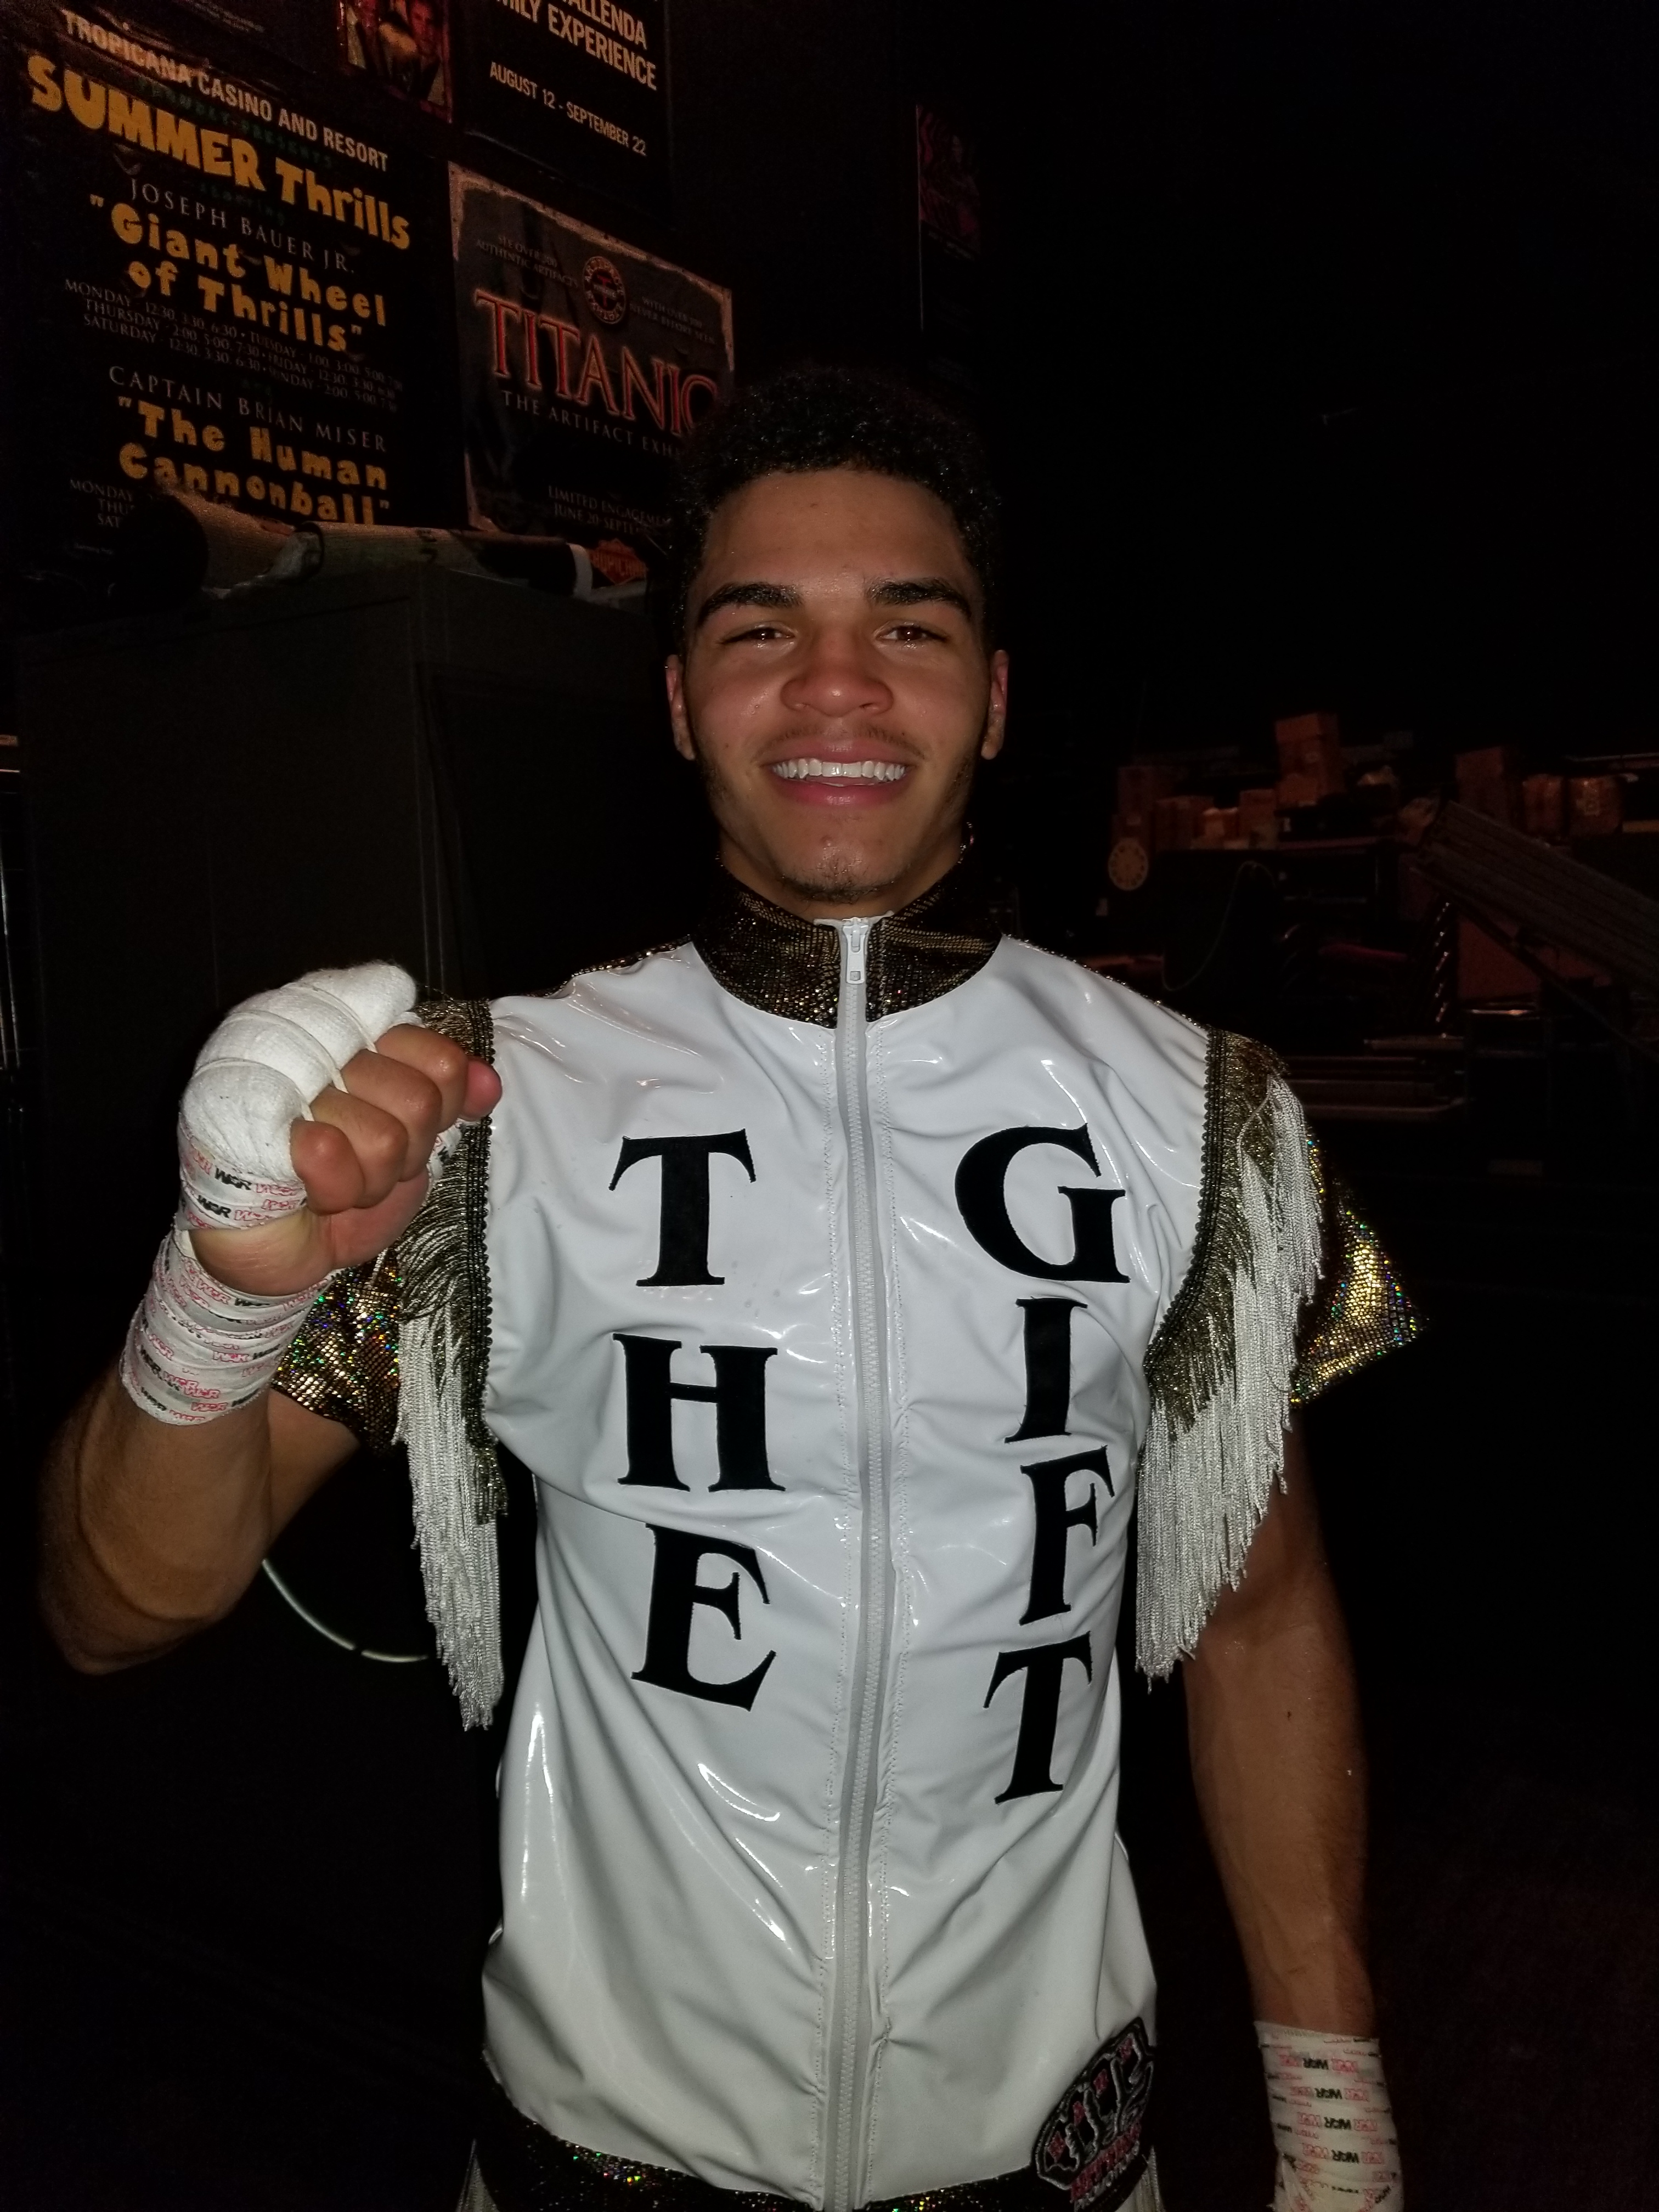 Christian Carto, Branden Pizarro Represent New Wave Of Philly Fighters – CBS Philly3024 x 4032